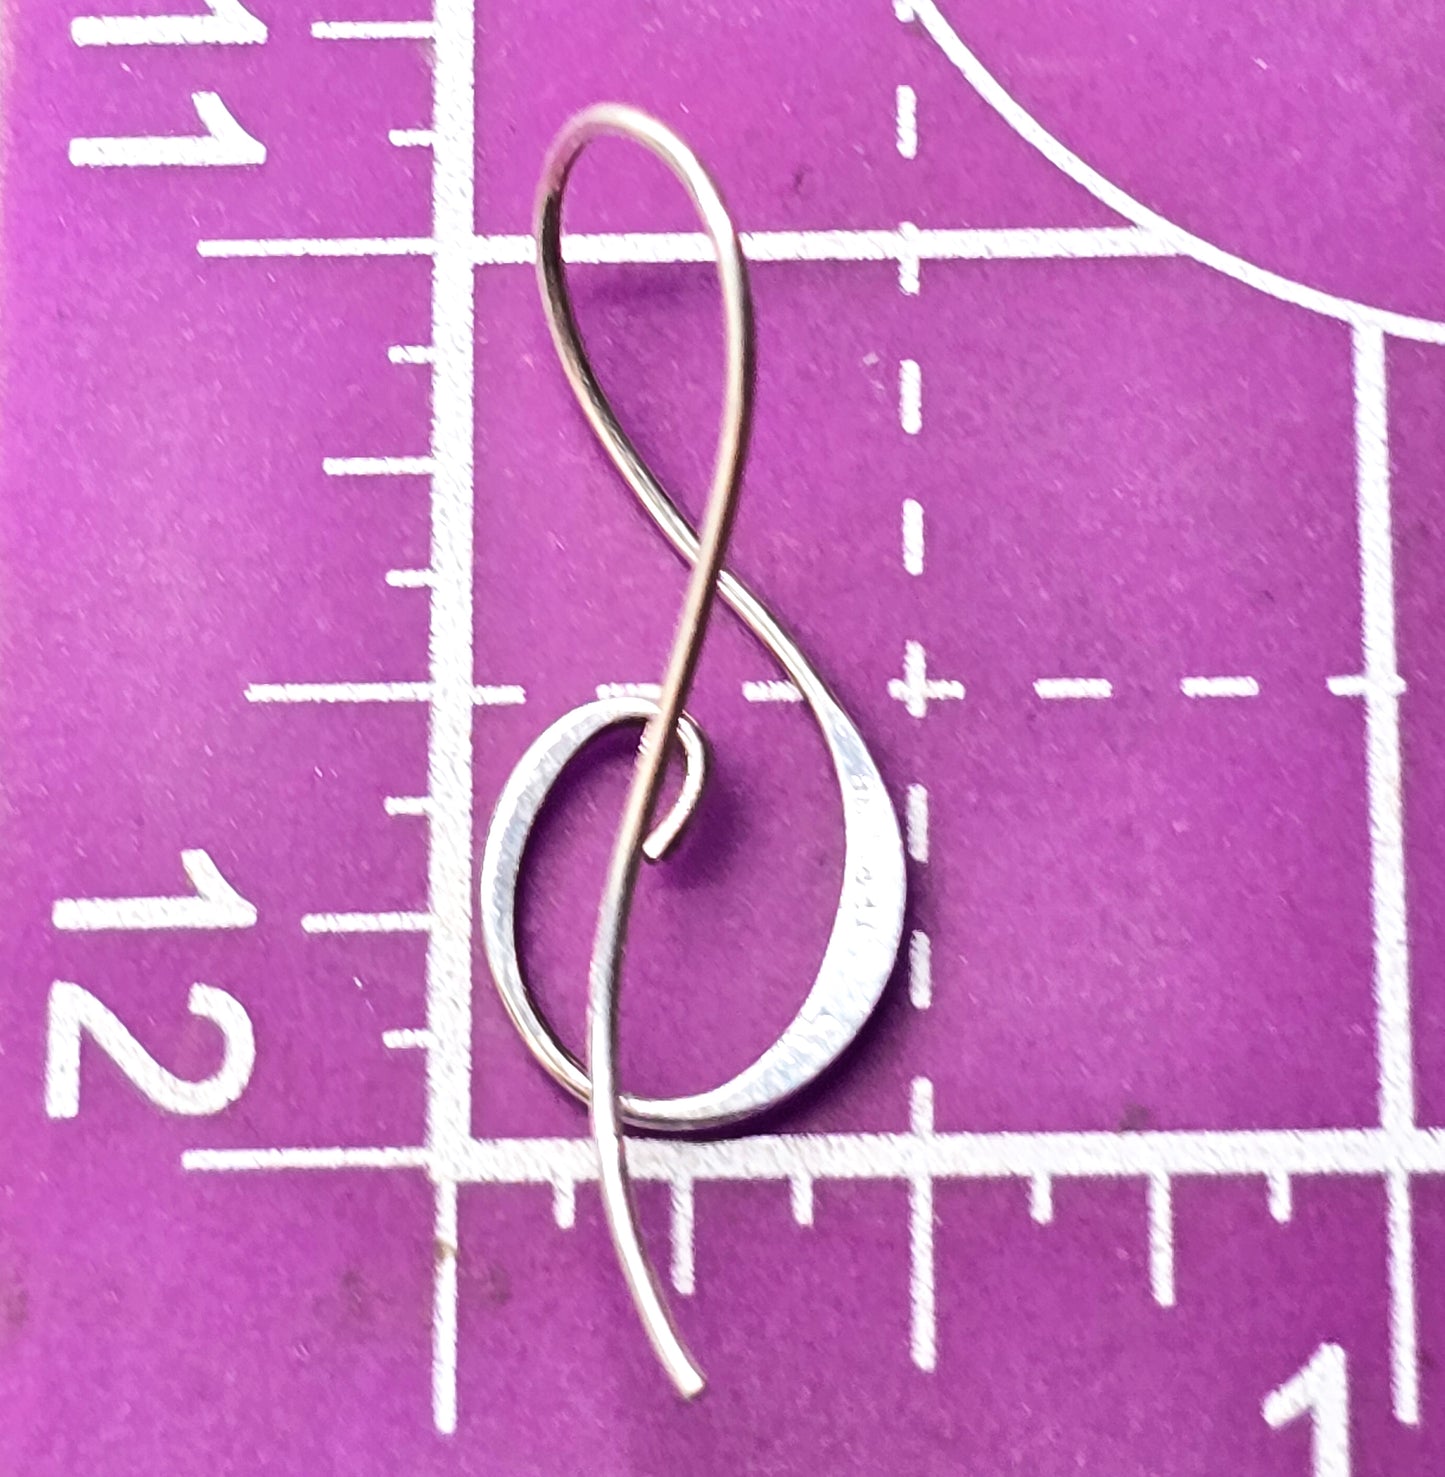 Treble Clef DR musical notes signed vintage sterling silver earrings